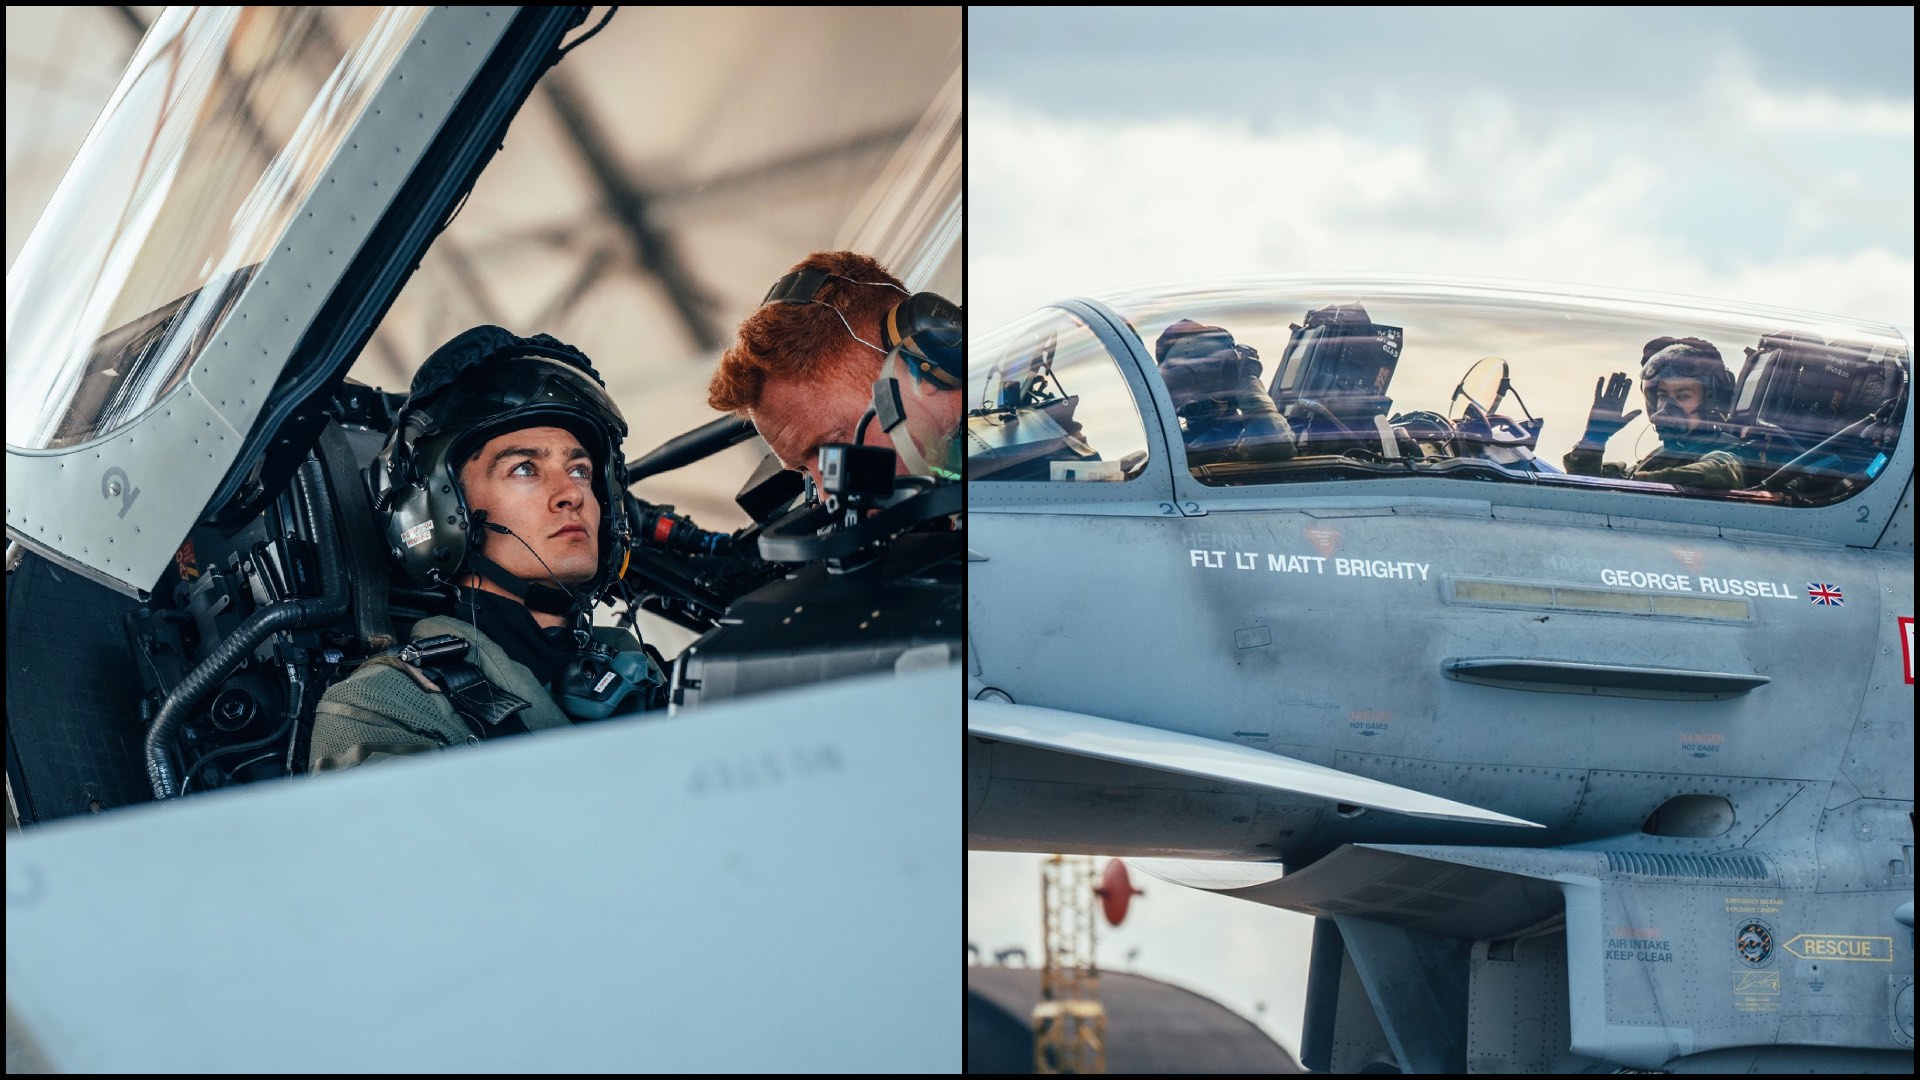 George Russell takes part in a ‘unique experience’ flying an RAF Typhoon